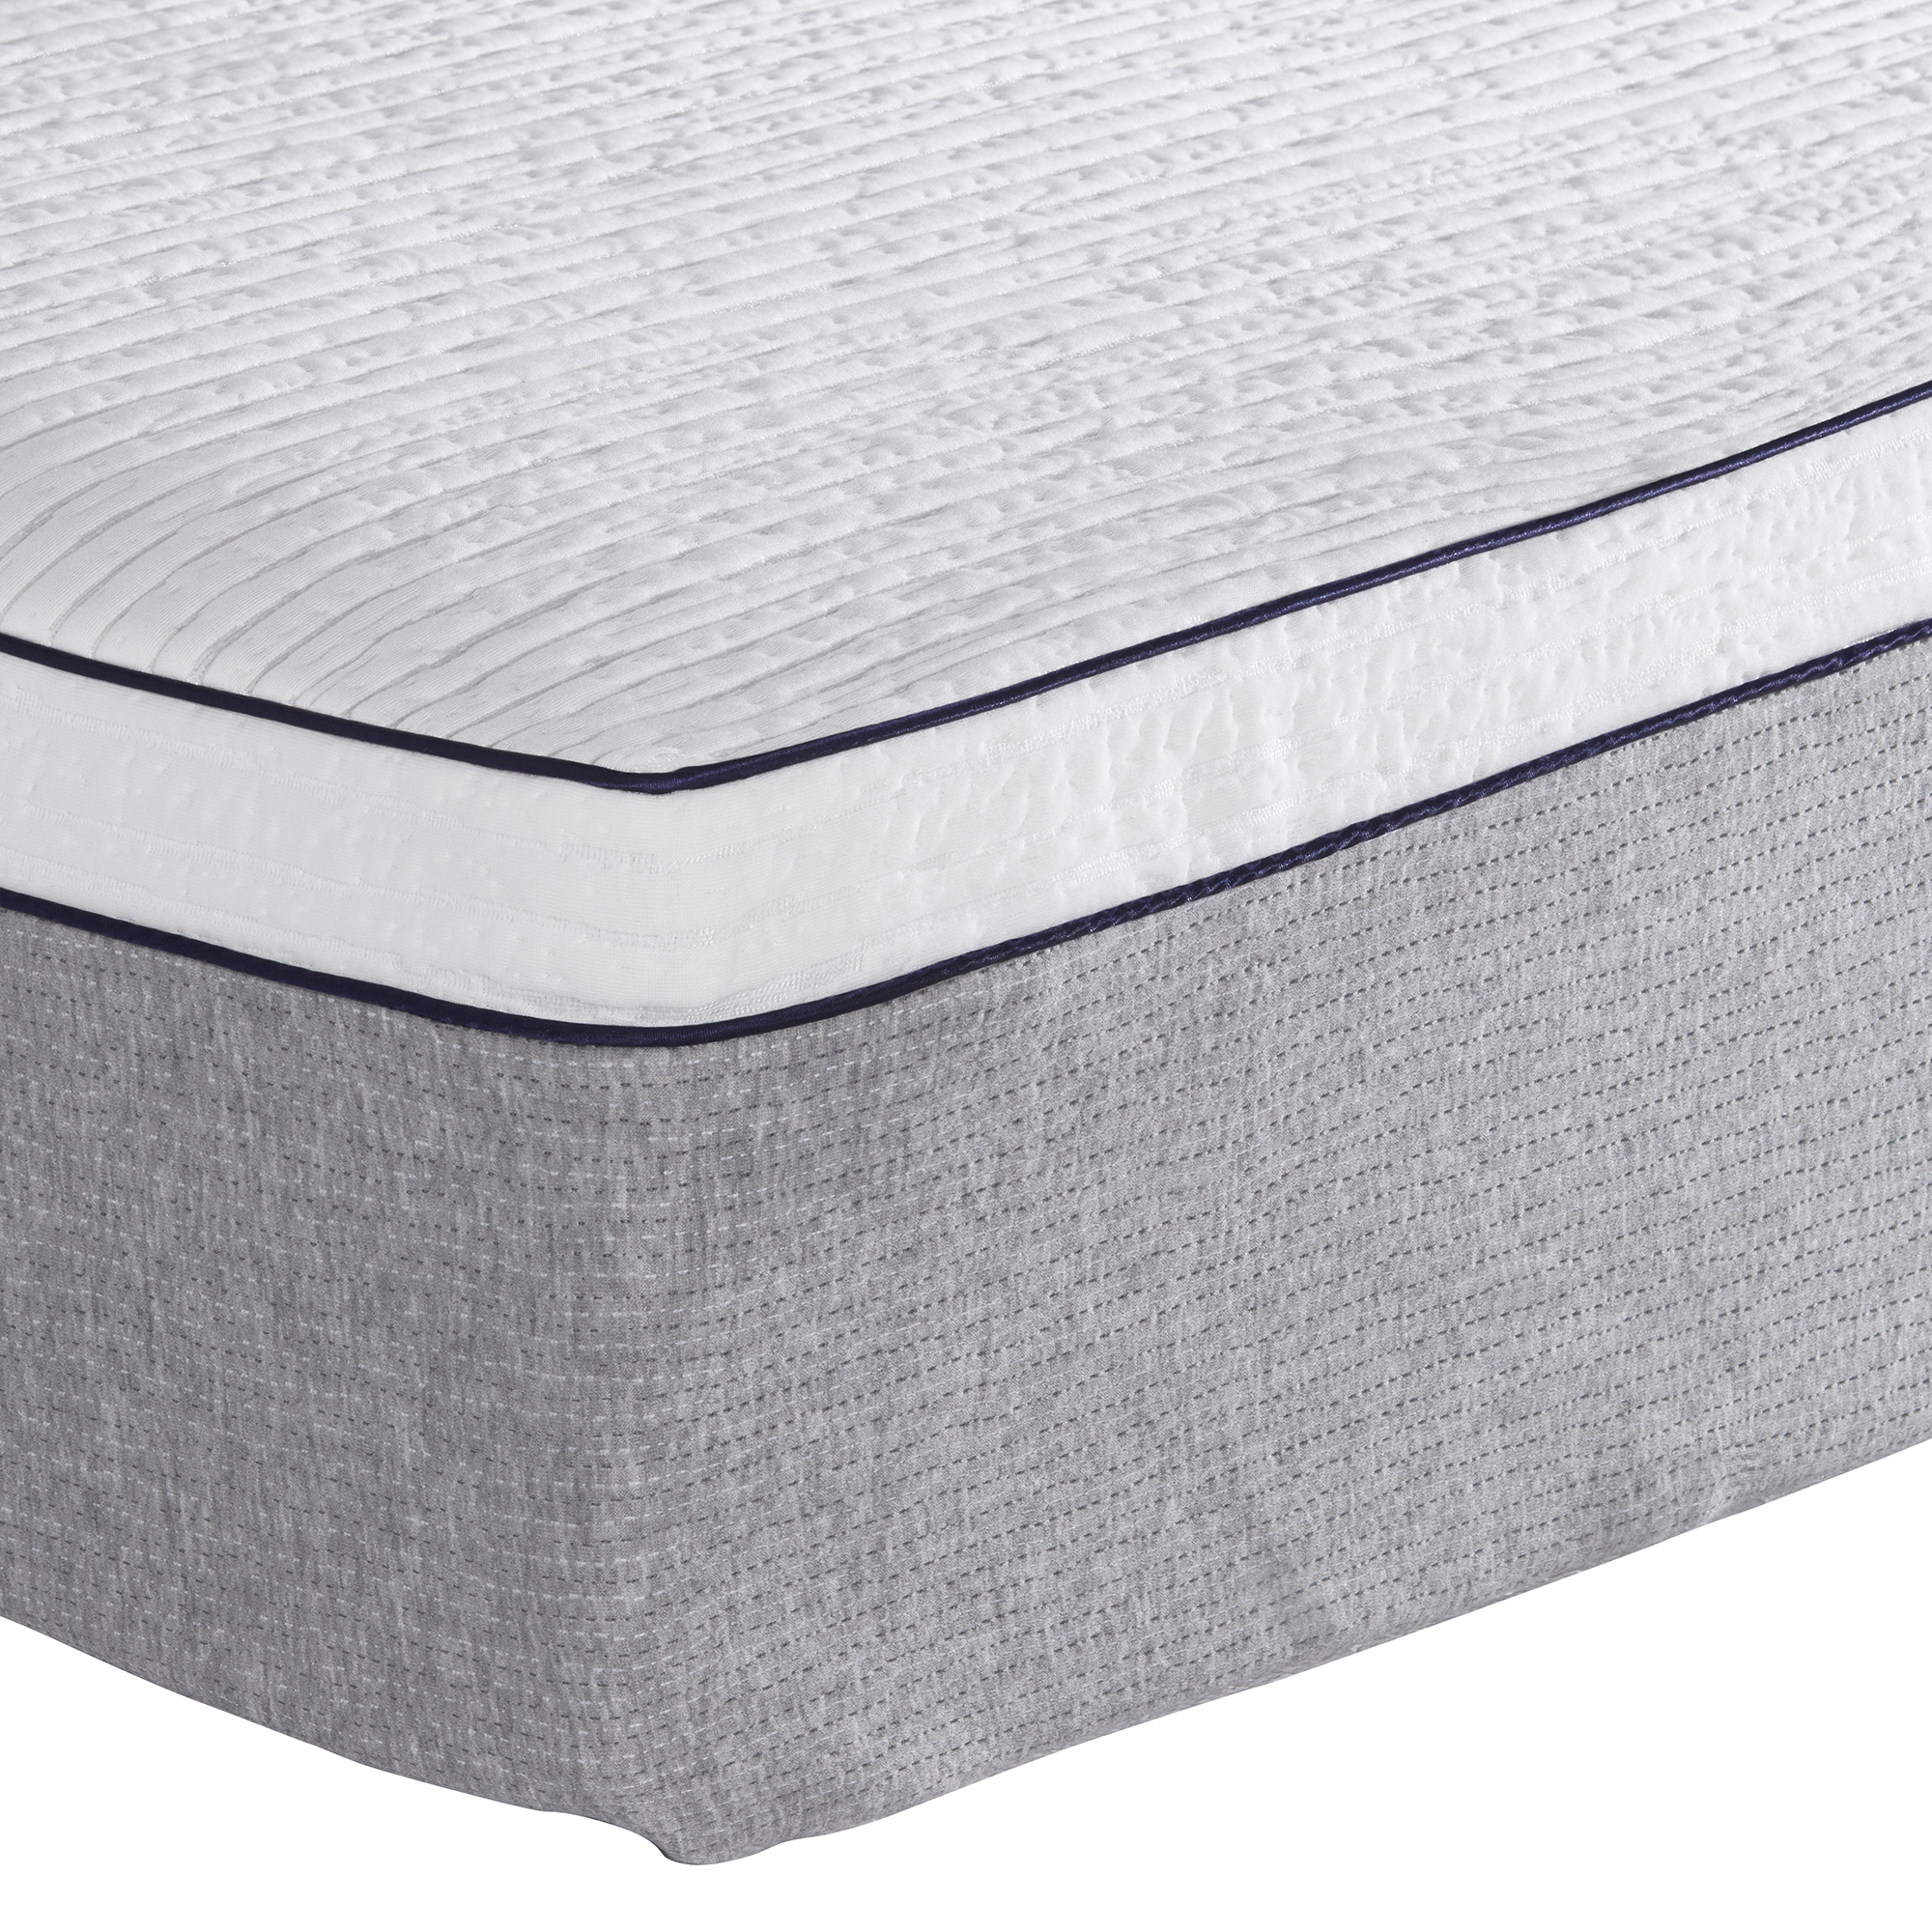 Photo of Gracie double size mattress 135x190cm in white